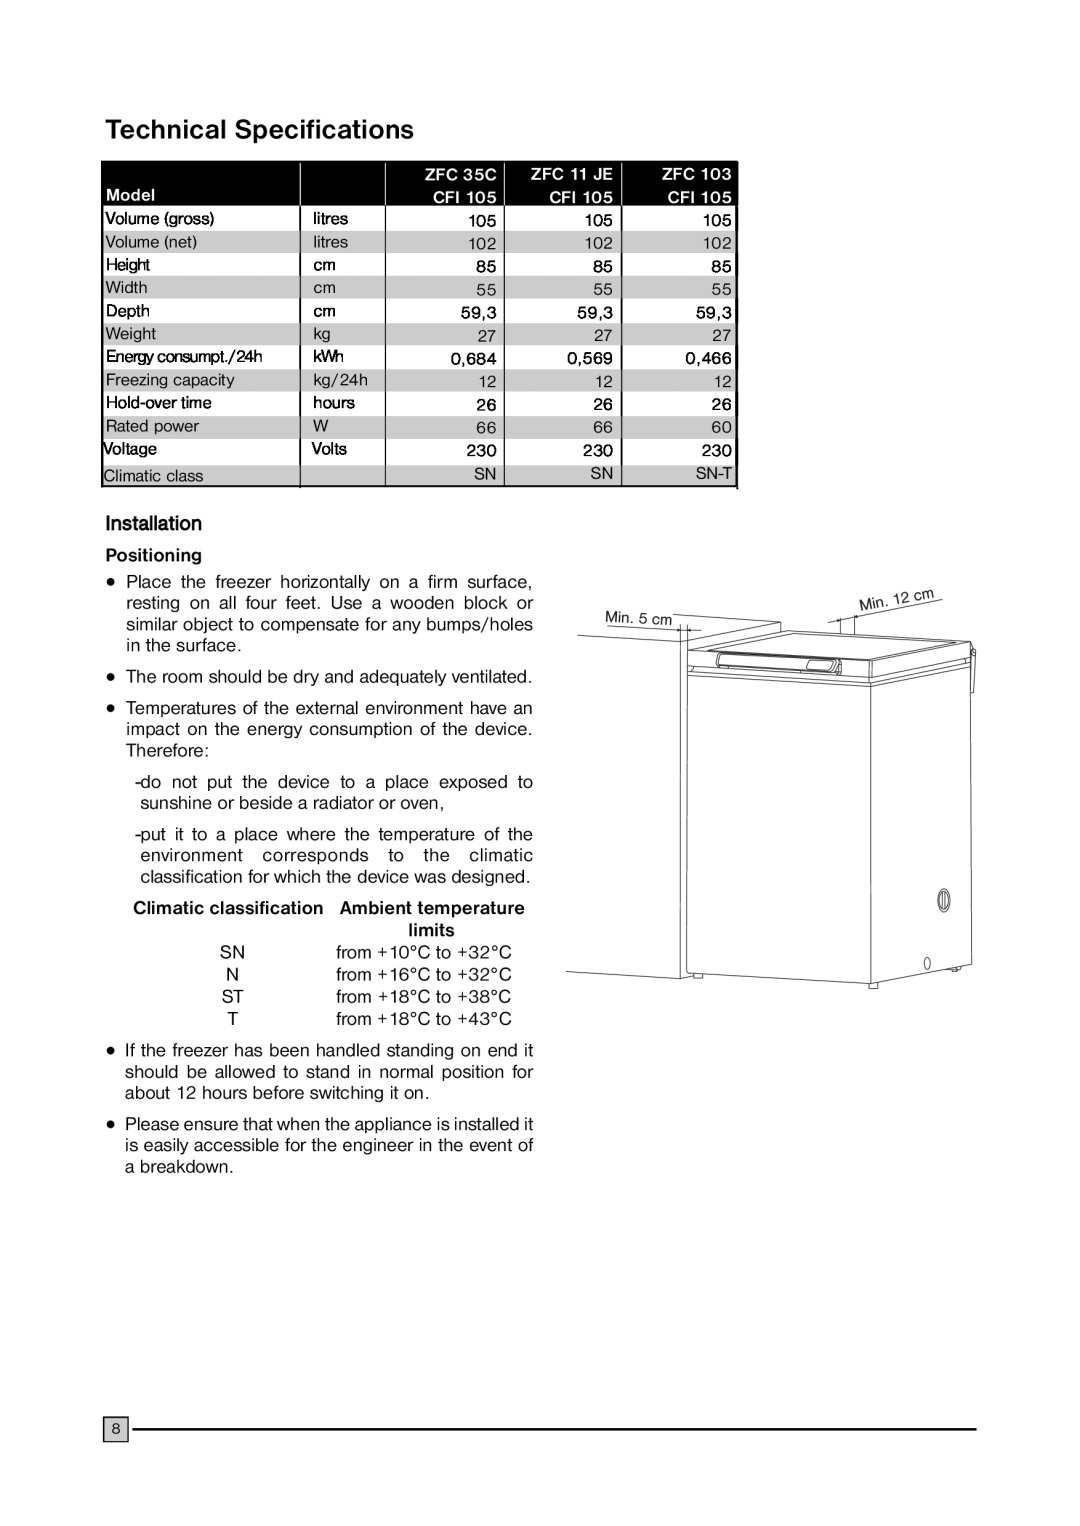 Zanussi ZFC103 installation manual Technical Specifications, Installation, Positioning, limits 